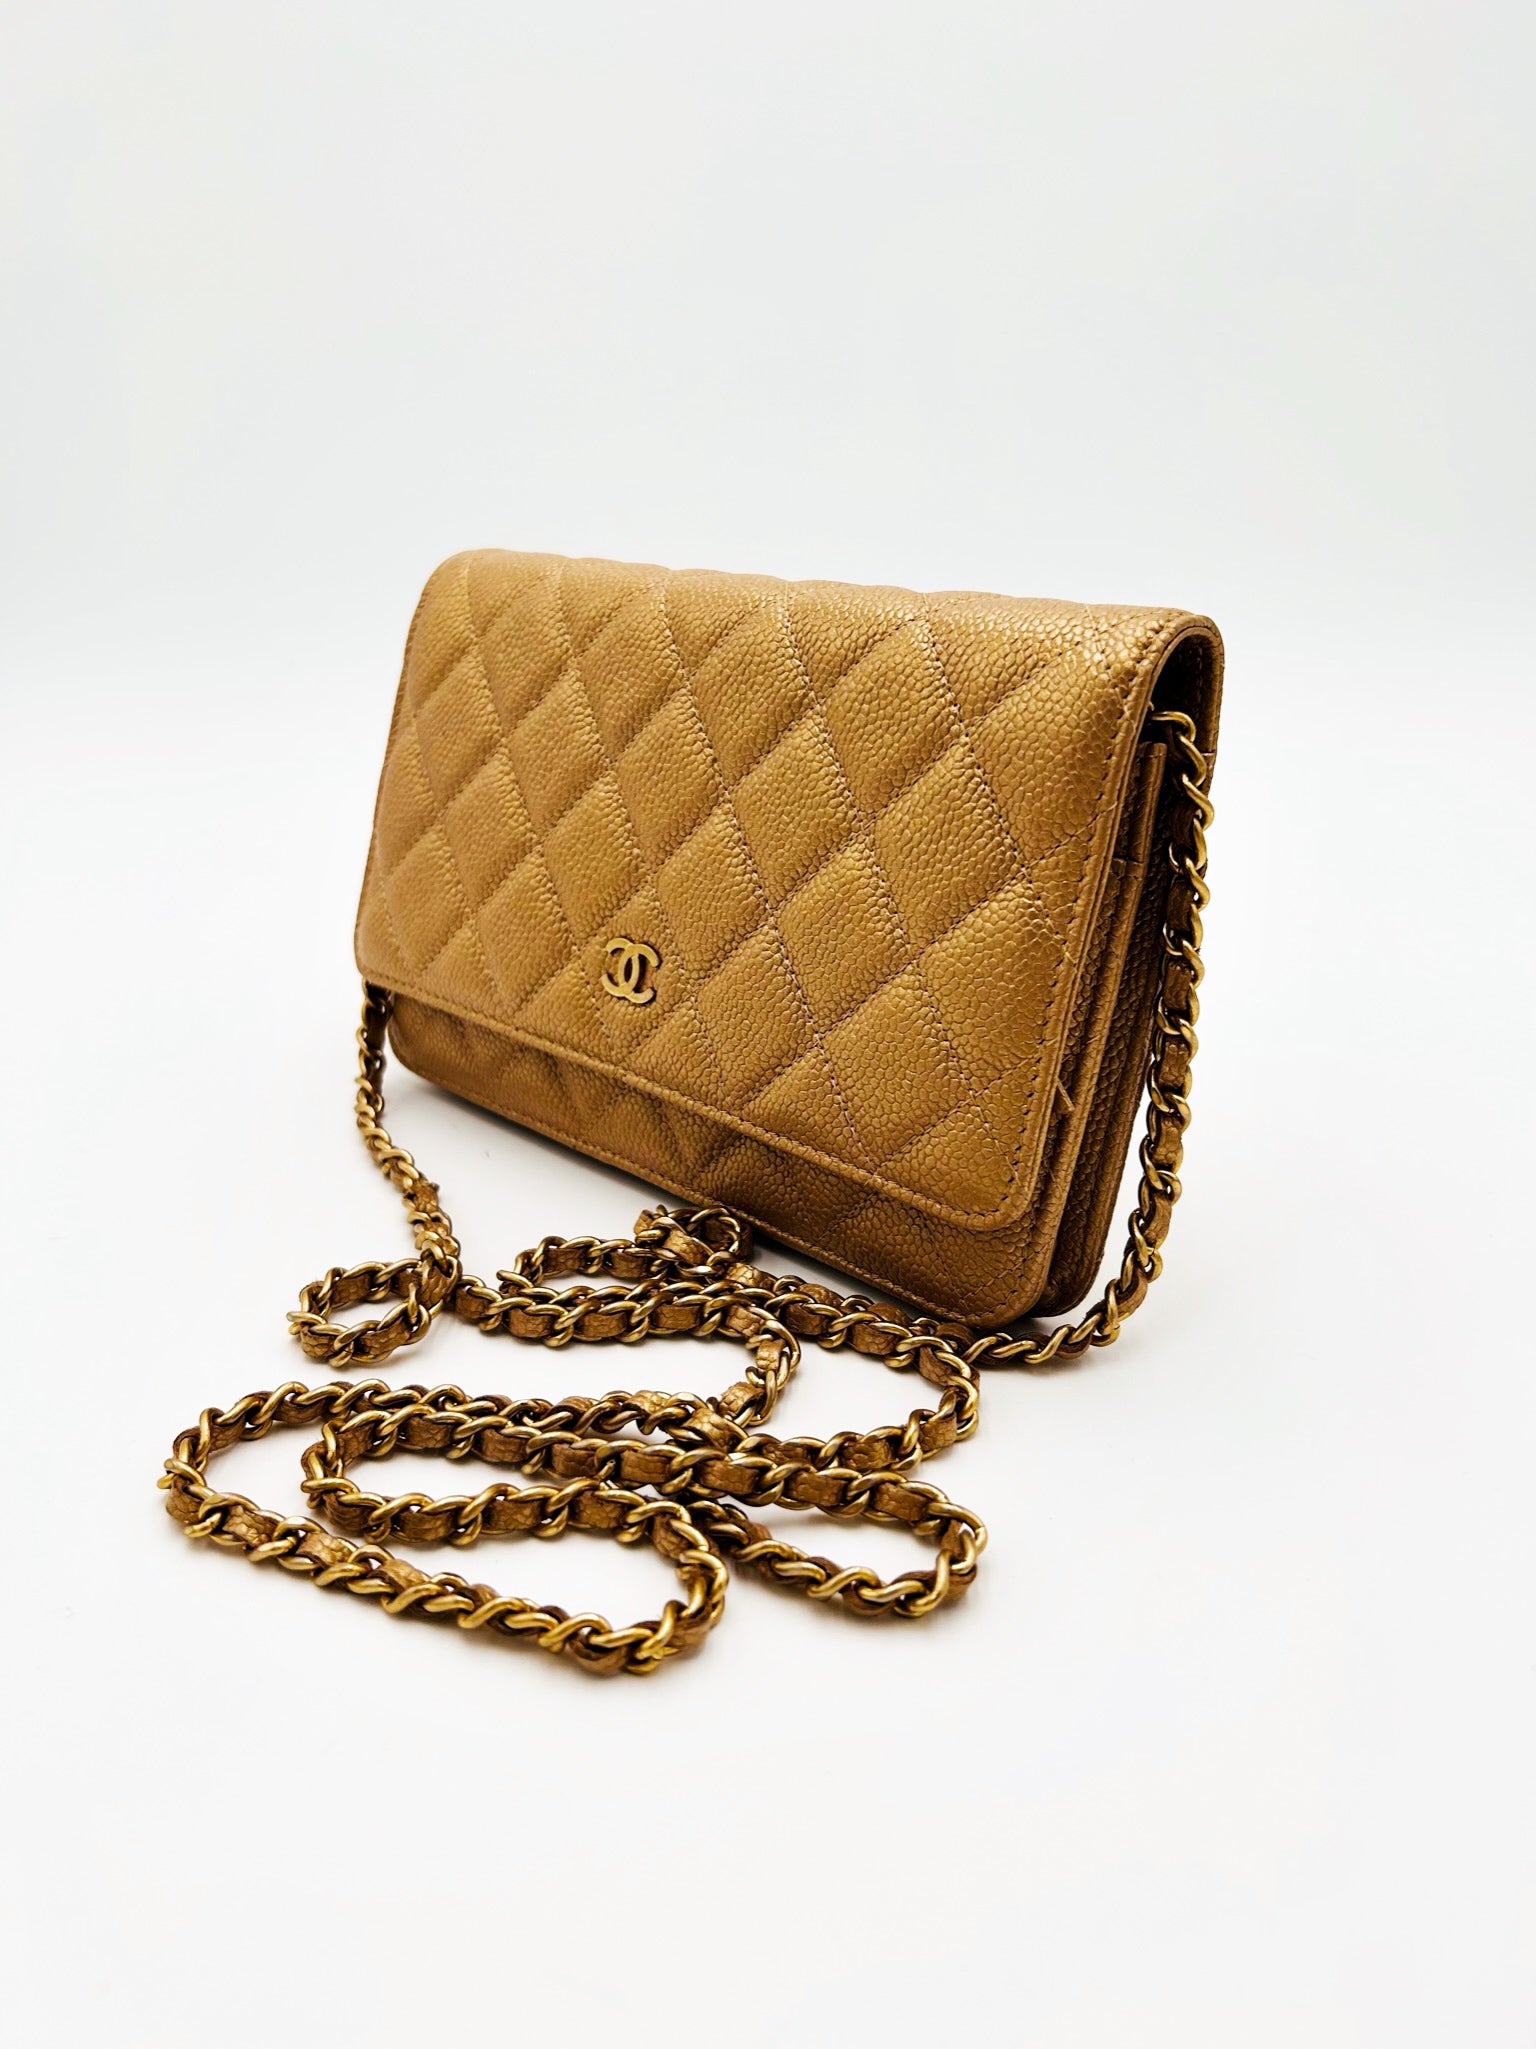 CHANEL WOC (Wallet on A Chain) GOLD/BEIGE